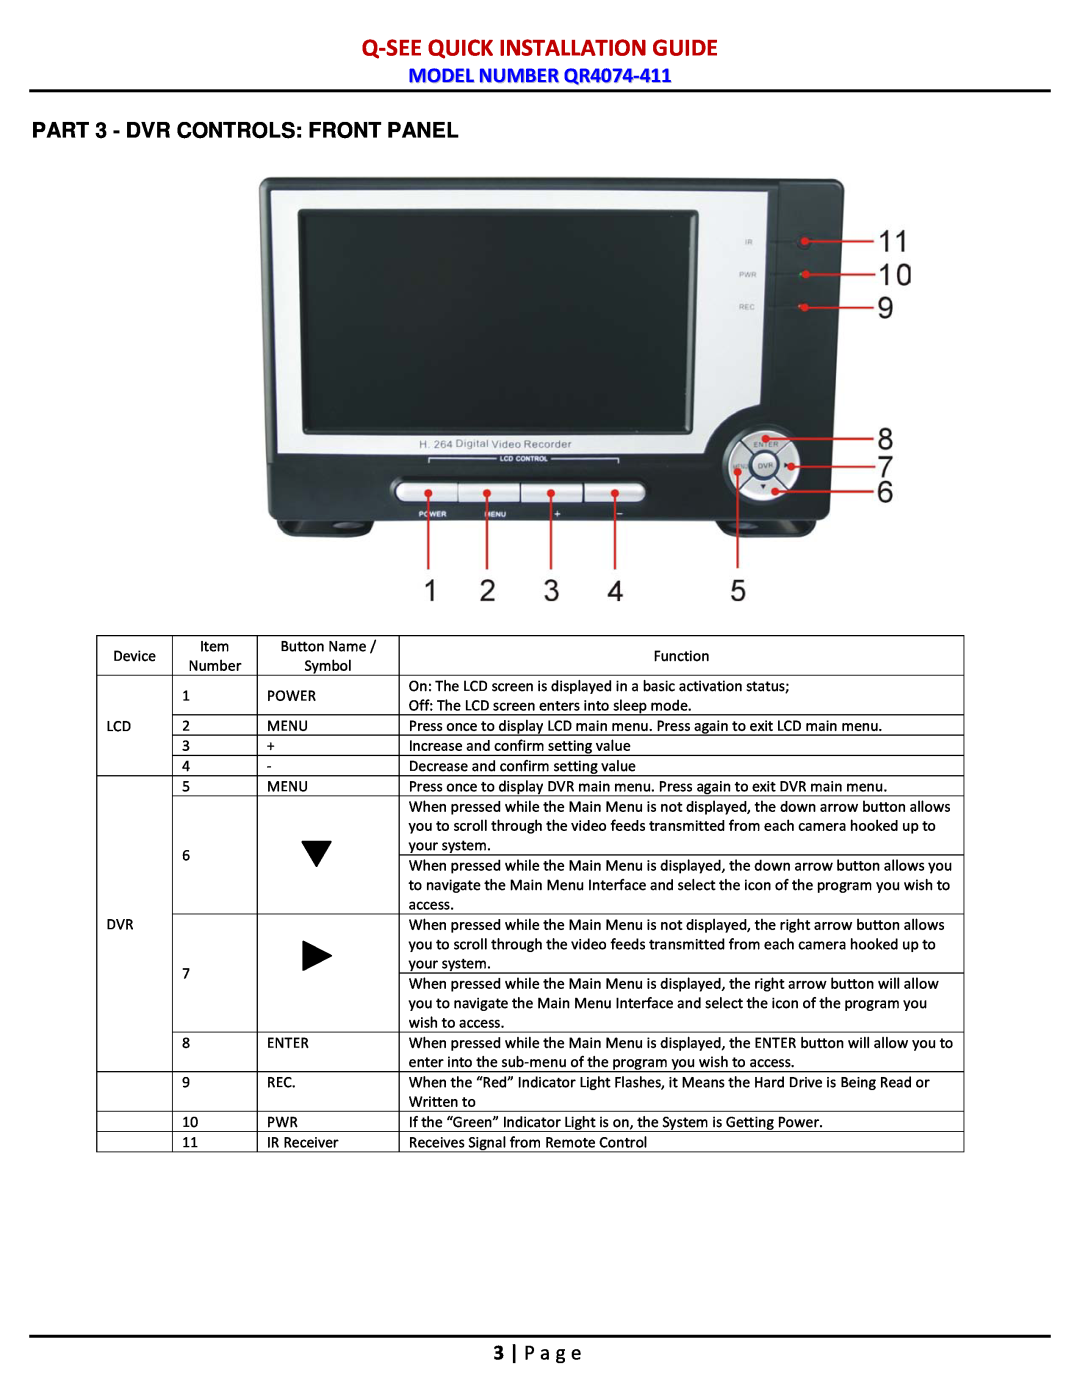 Q-See manual PART 3 - DVR CONTROLS FRONT PANEL, P a g e, Q-Seequick Installation Guide, MODEL NUMBER QR4074-411 